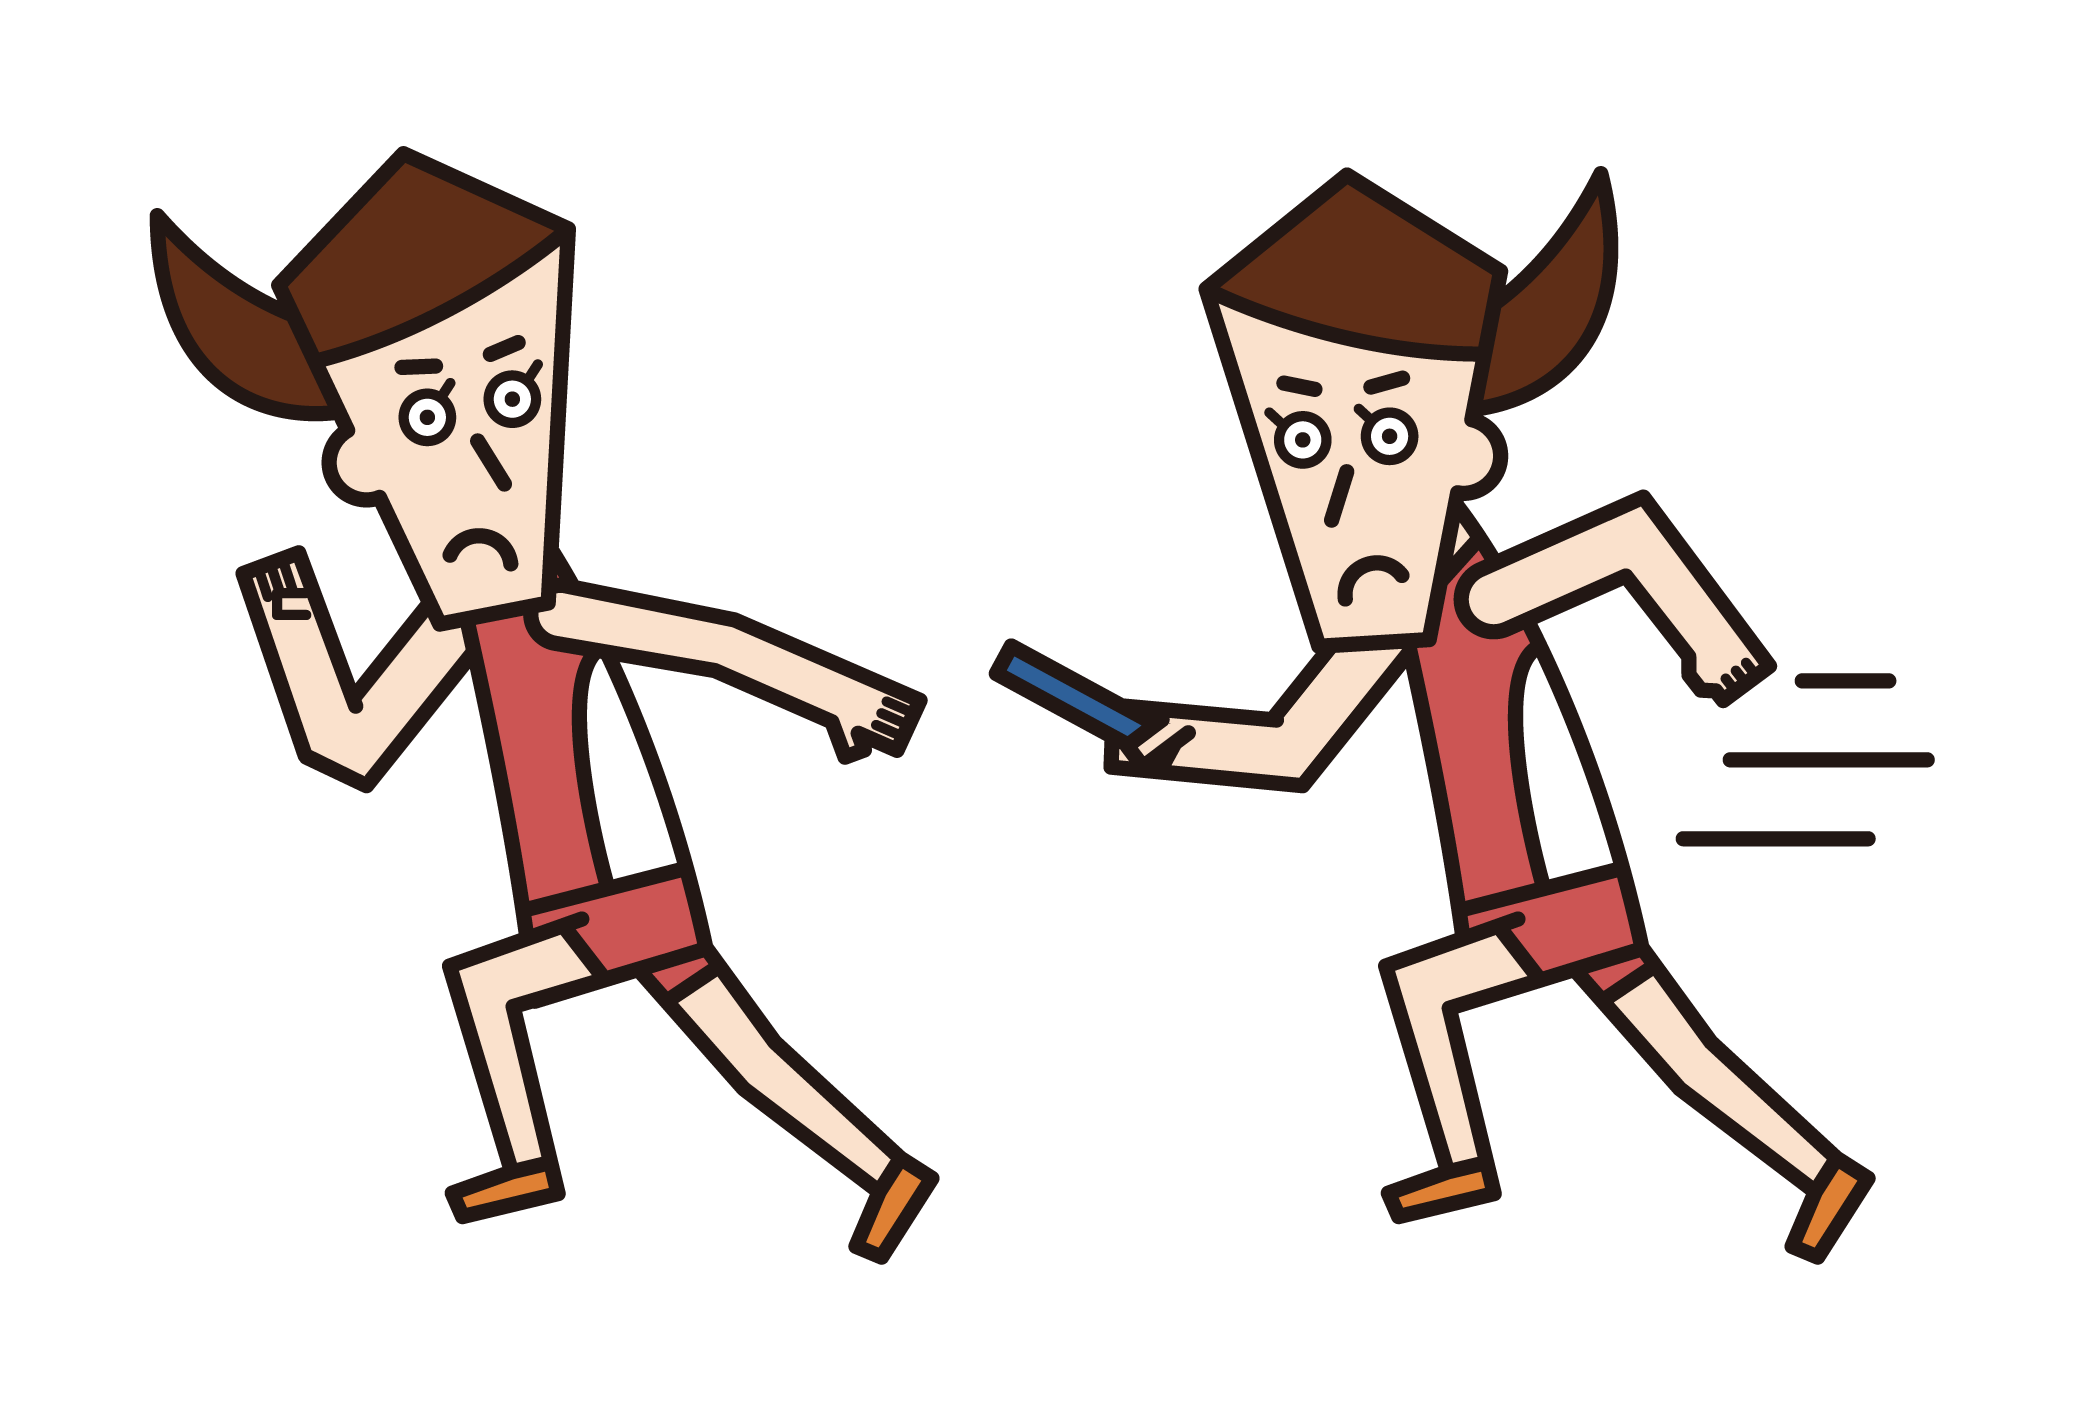 Illustration of a player (female) passing the baton in a relay run